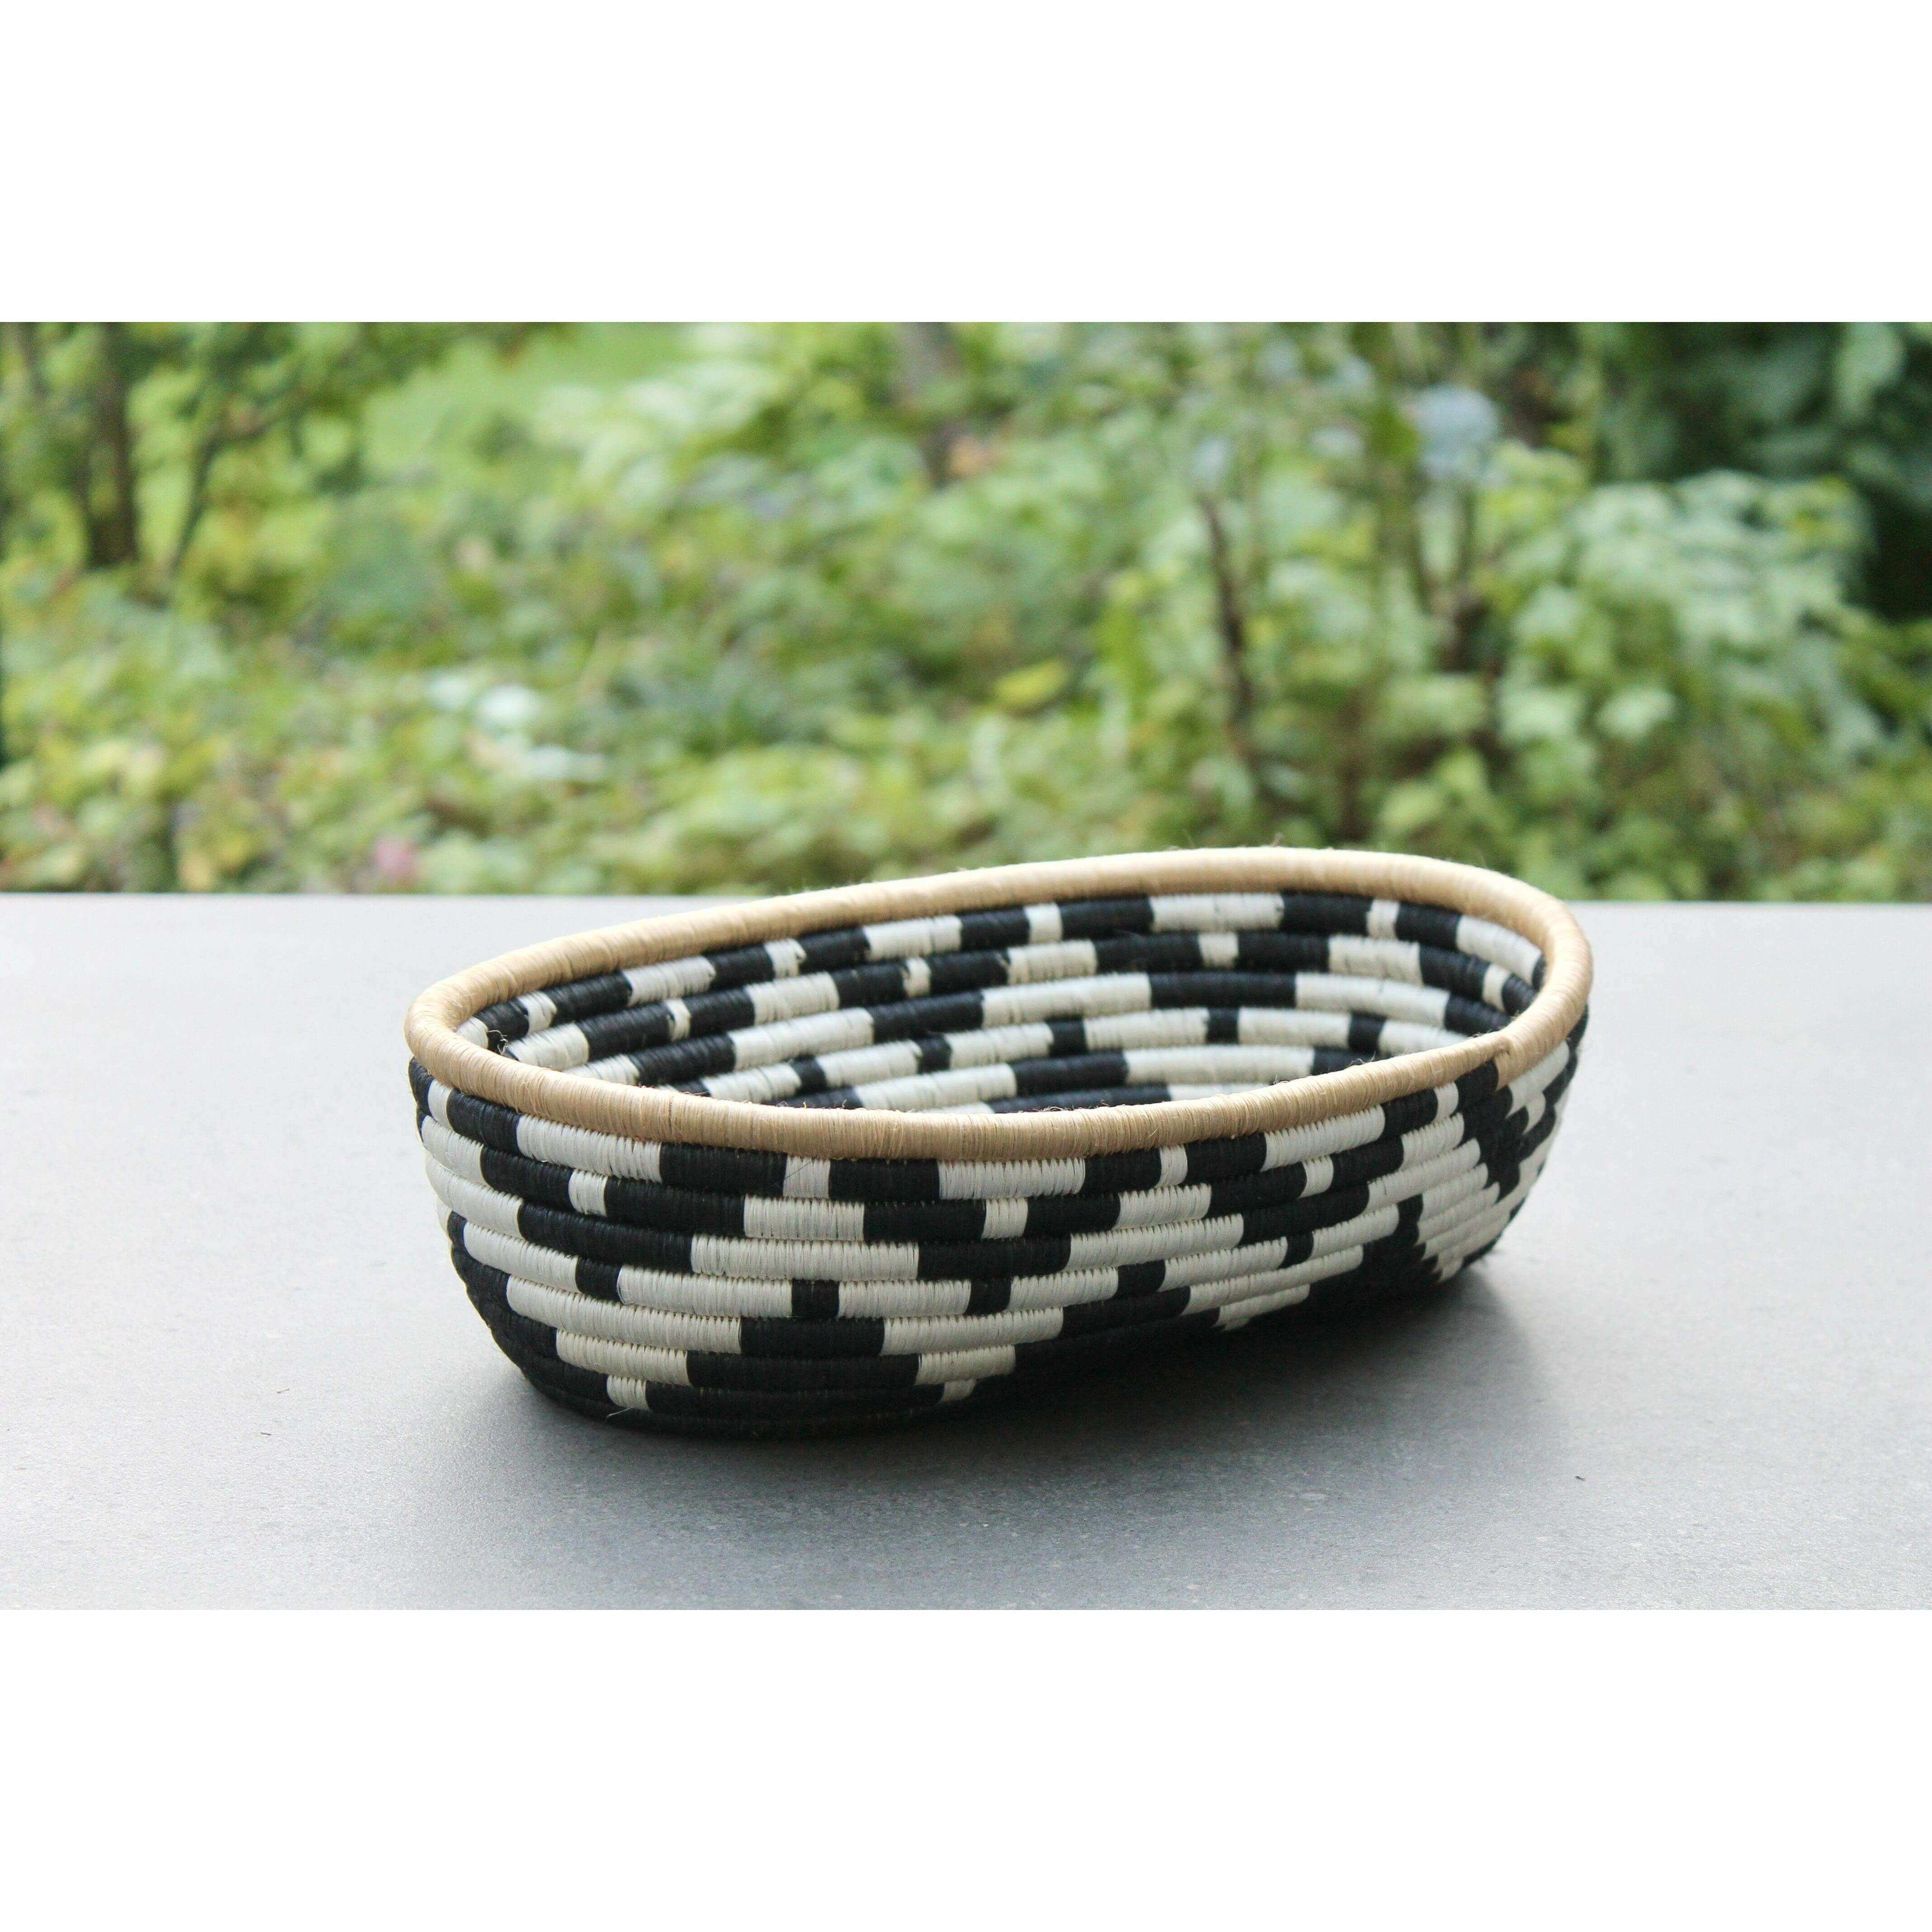 Ethically made woven bread basket